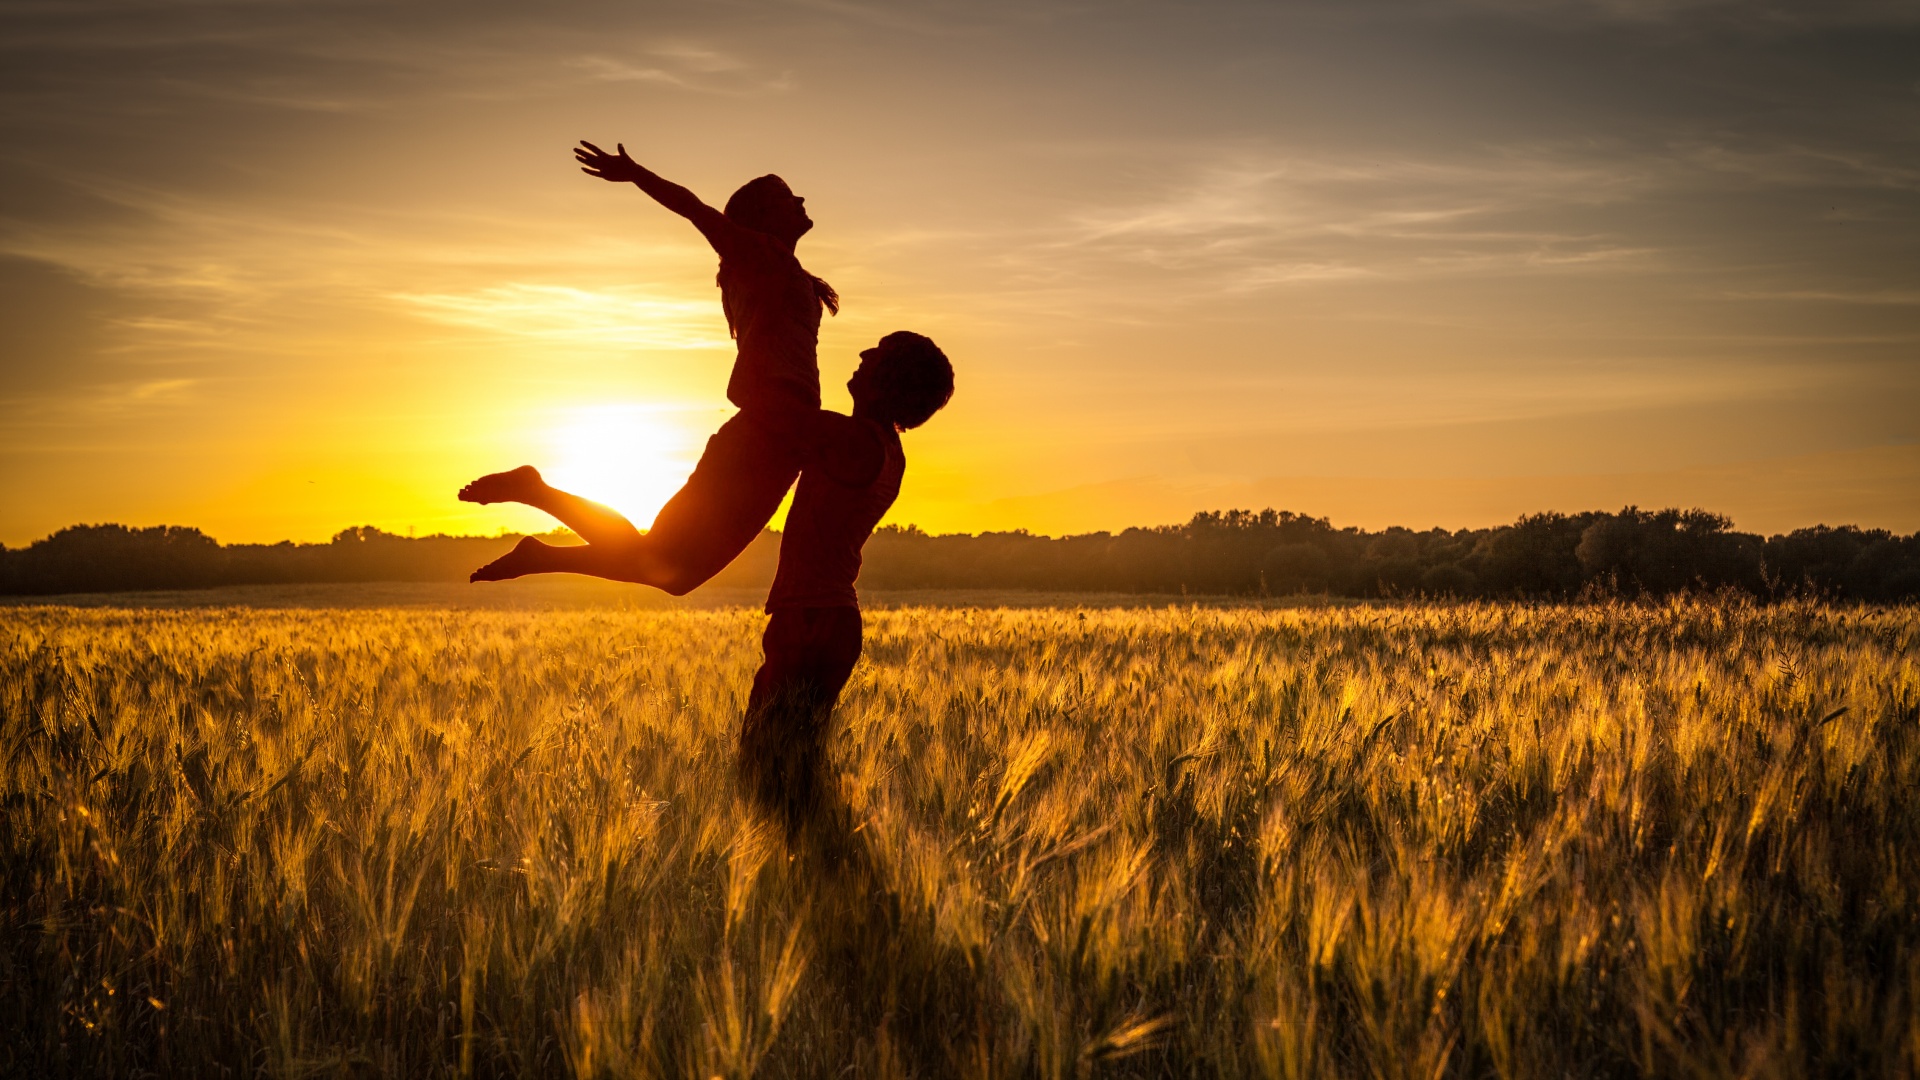 Couple Wallpaper 4K, Silhouette, Sunset, Romantic, Together, Evening